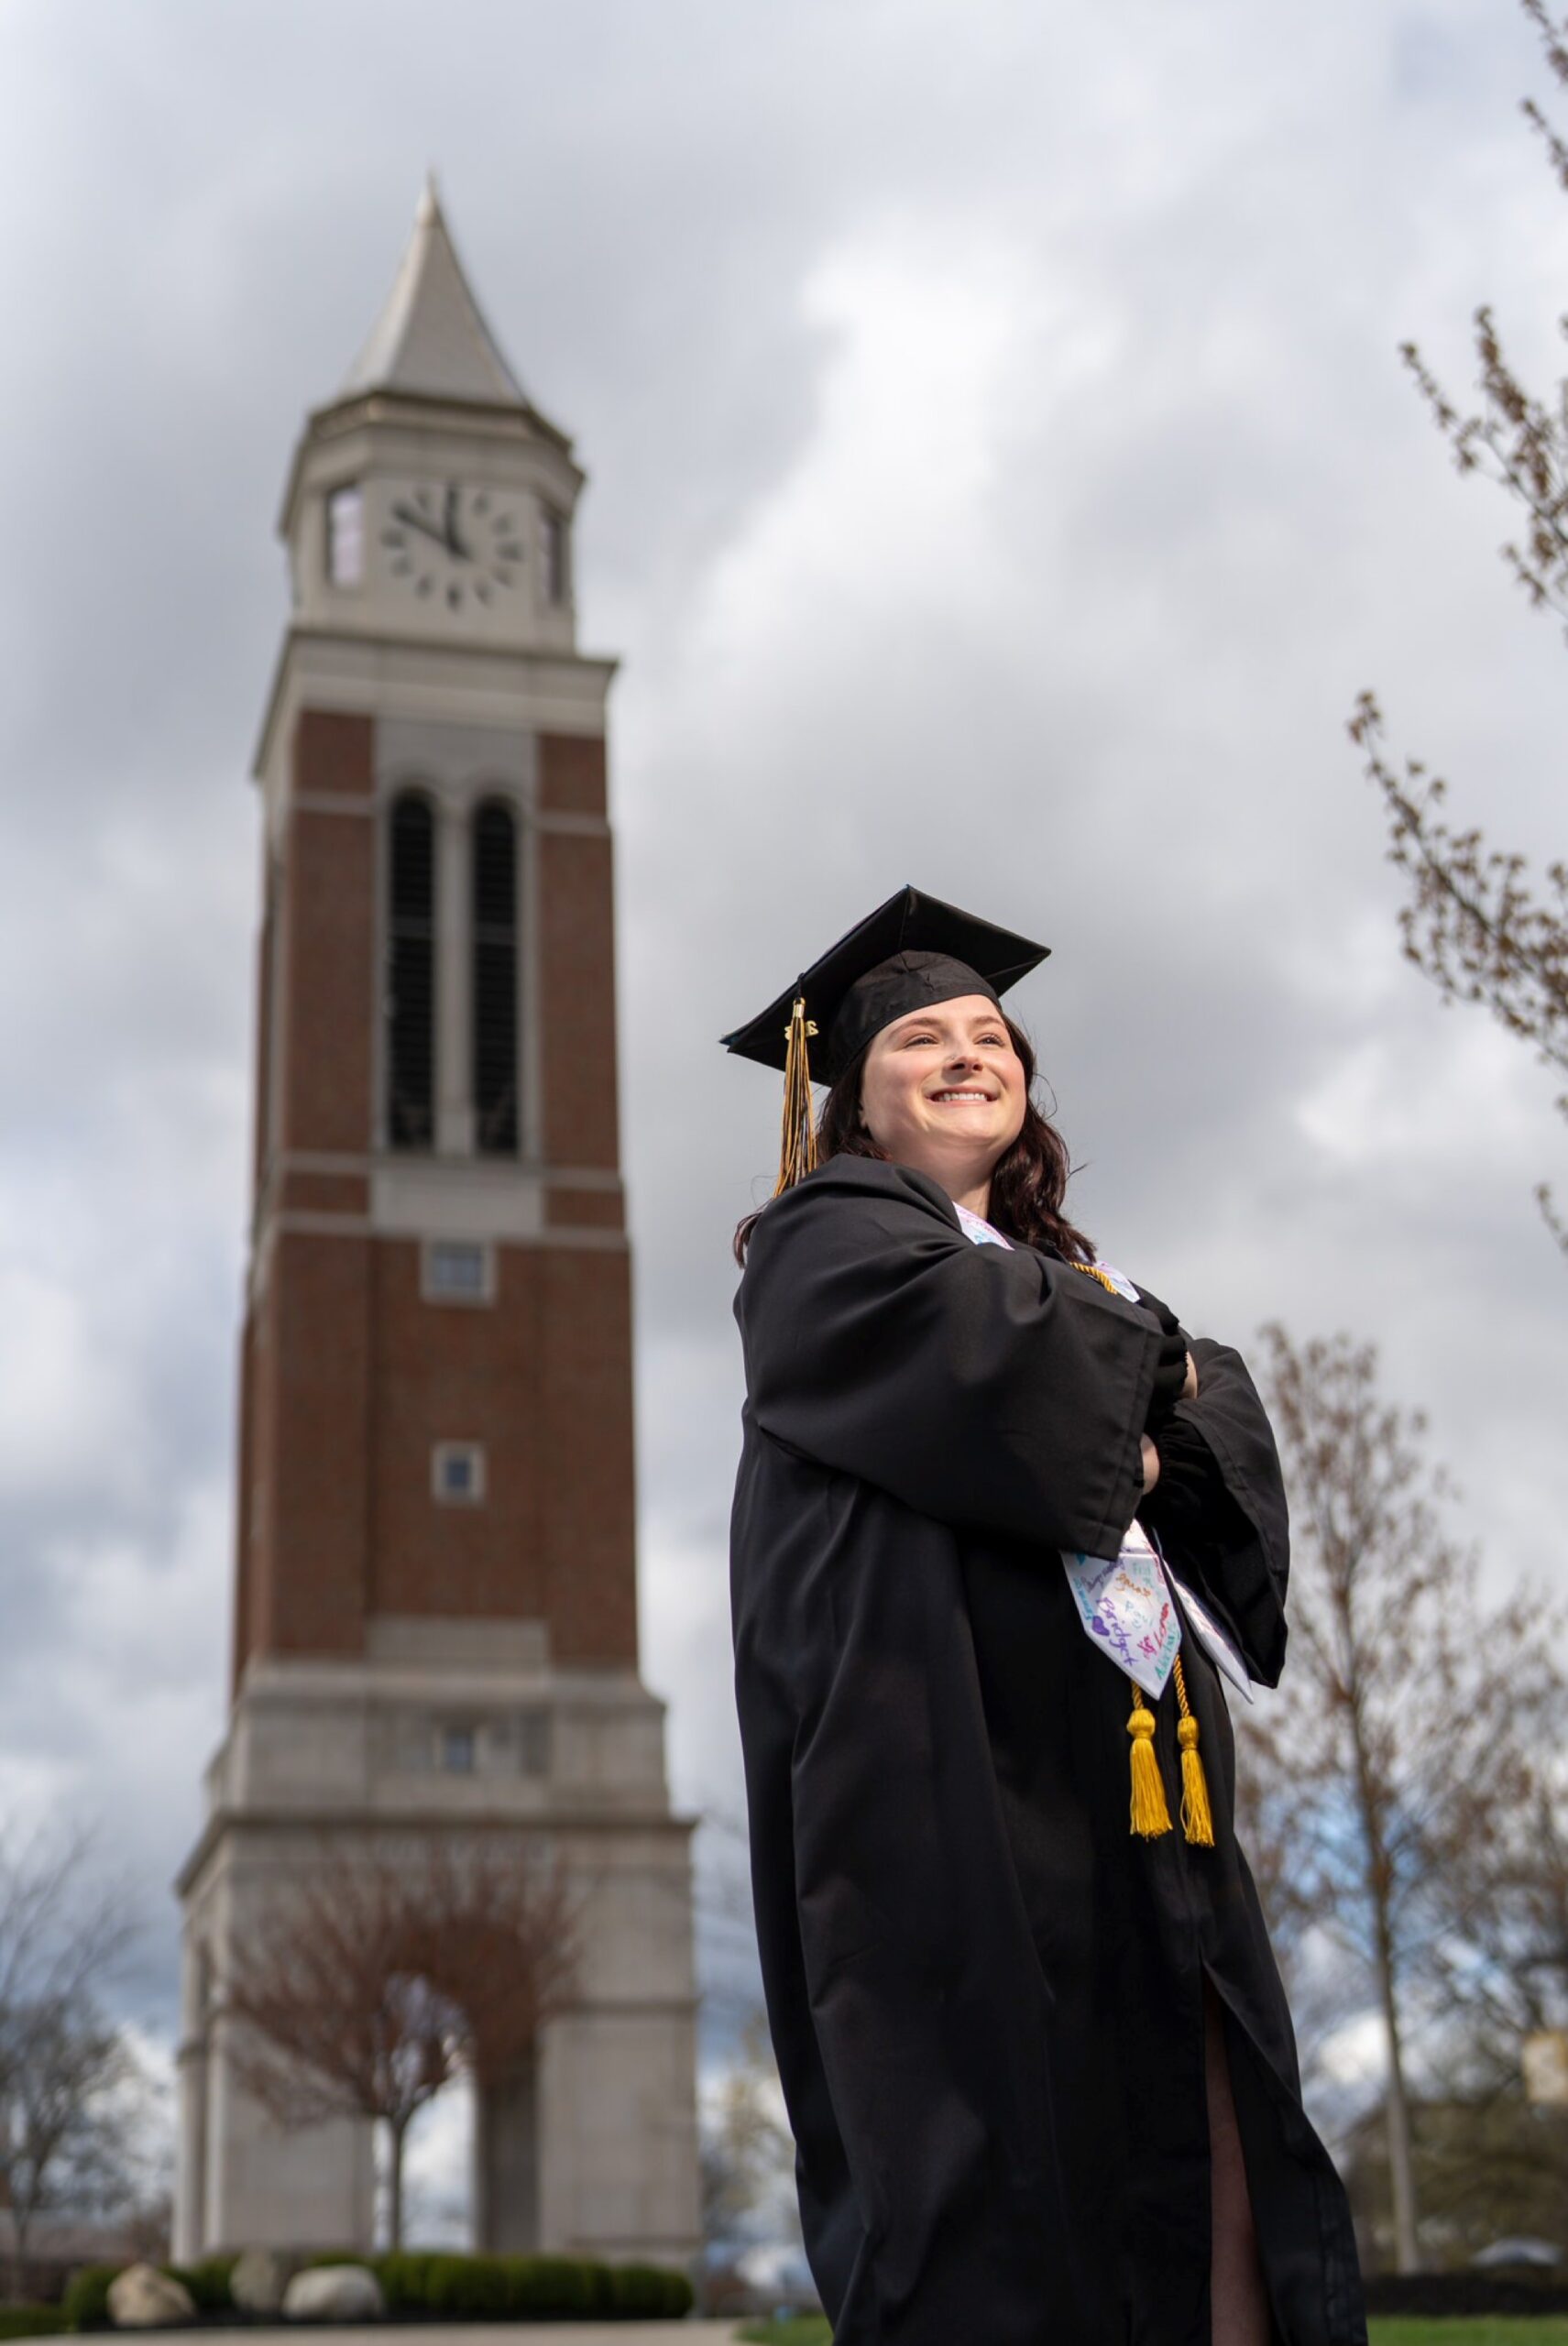 OU college graduation photos in front of Elliot Tower on Oakland University's campus.